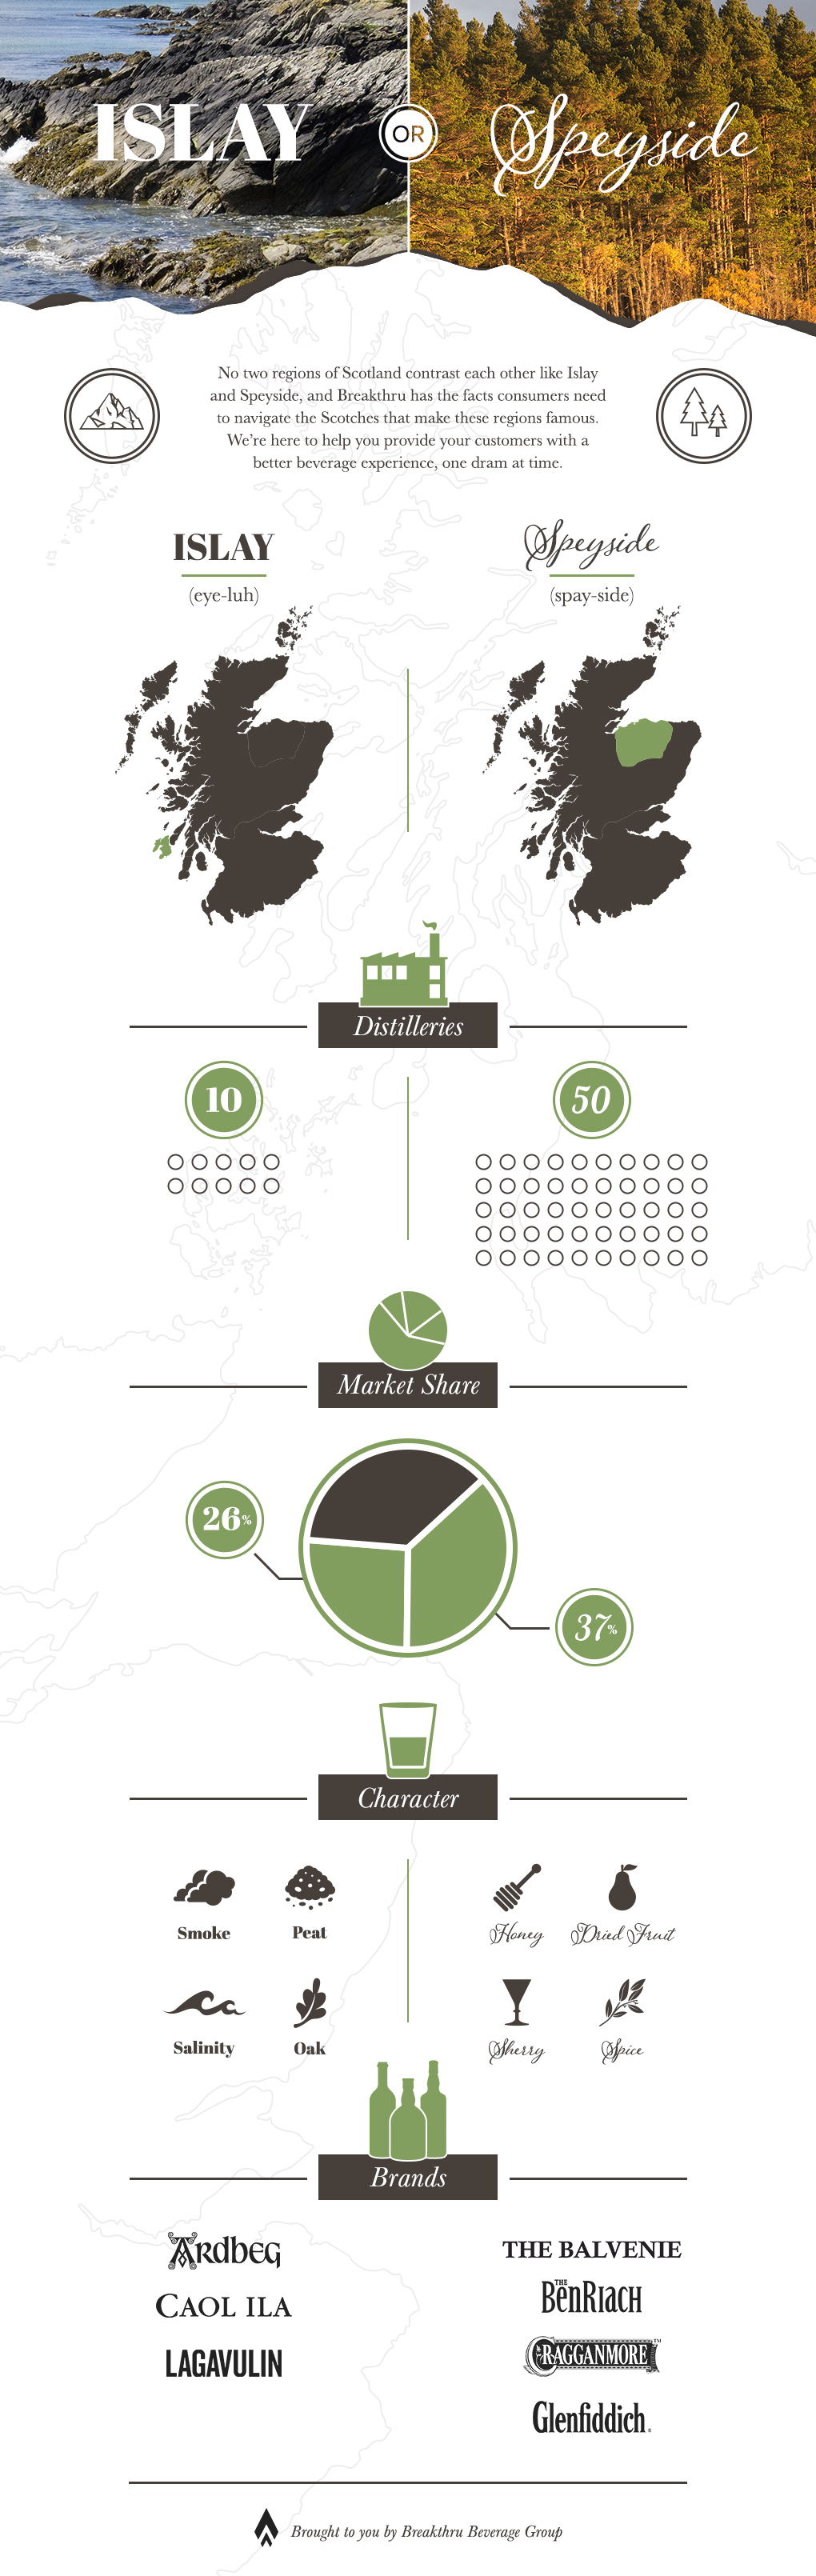 CO - Islay or Speyside Infographic